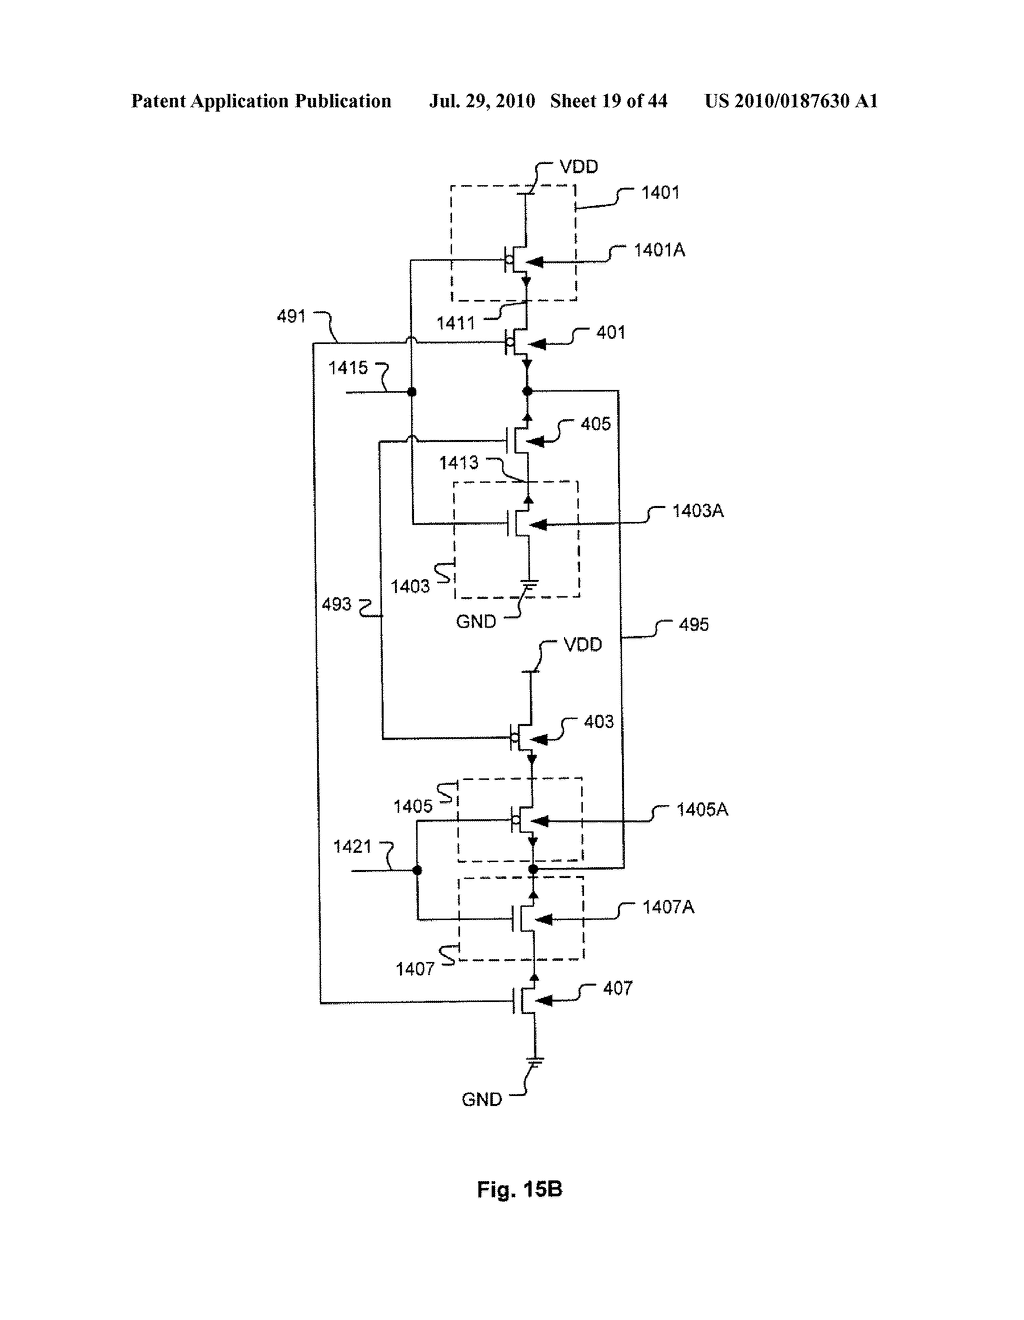 Channelized Gate Level Cross-Coupled Transistor Device with Connection Between Cross-Coupled Transistor Gate Electrodes Made Utilizing Interconnect Level Other than Gate Electrode Level - diagram, schematic, and image 20